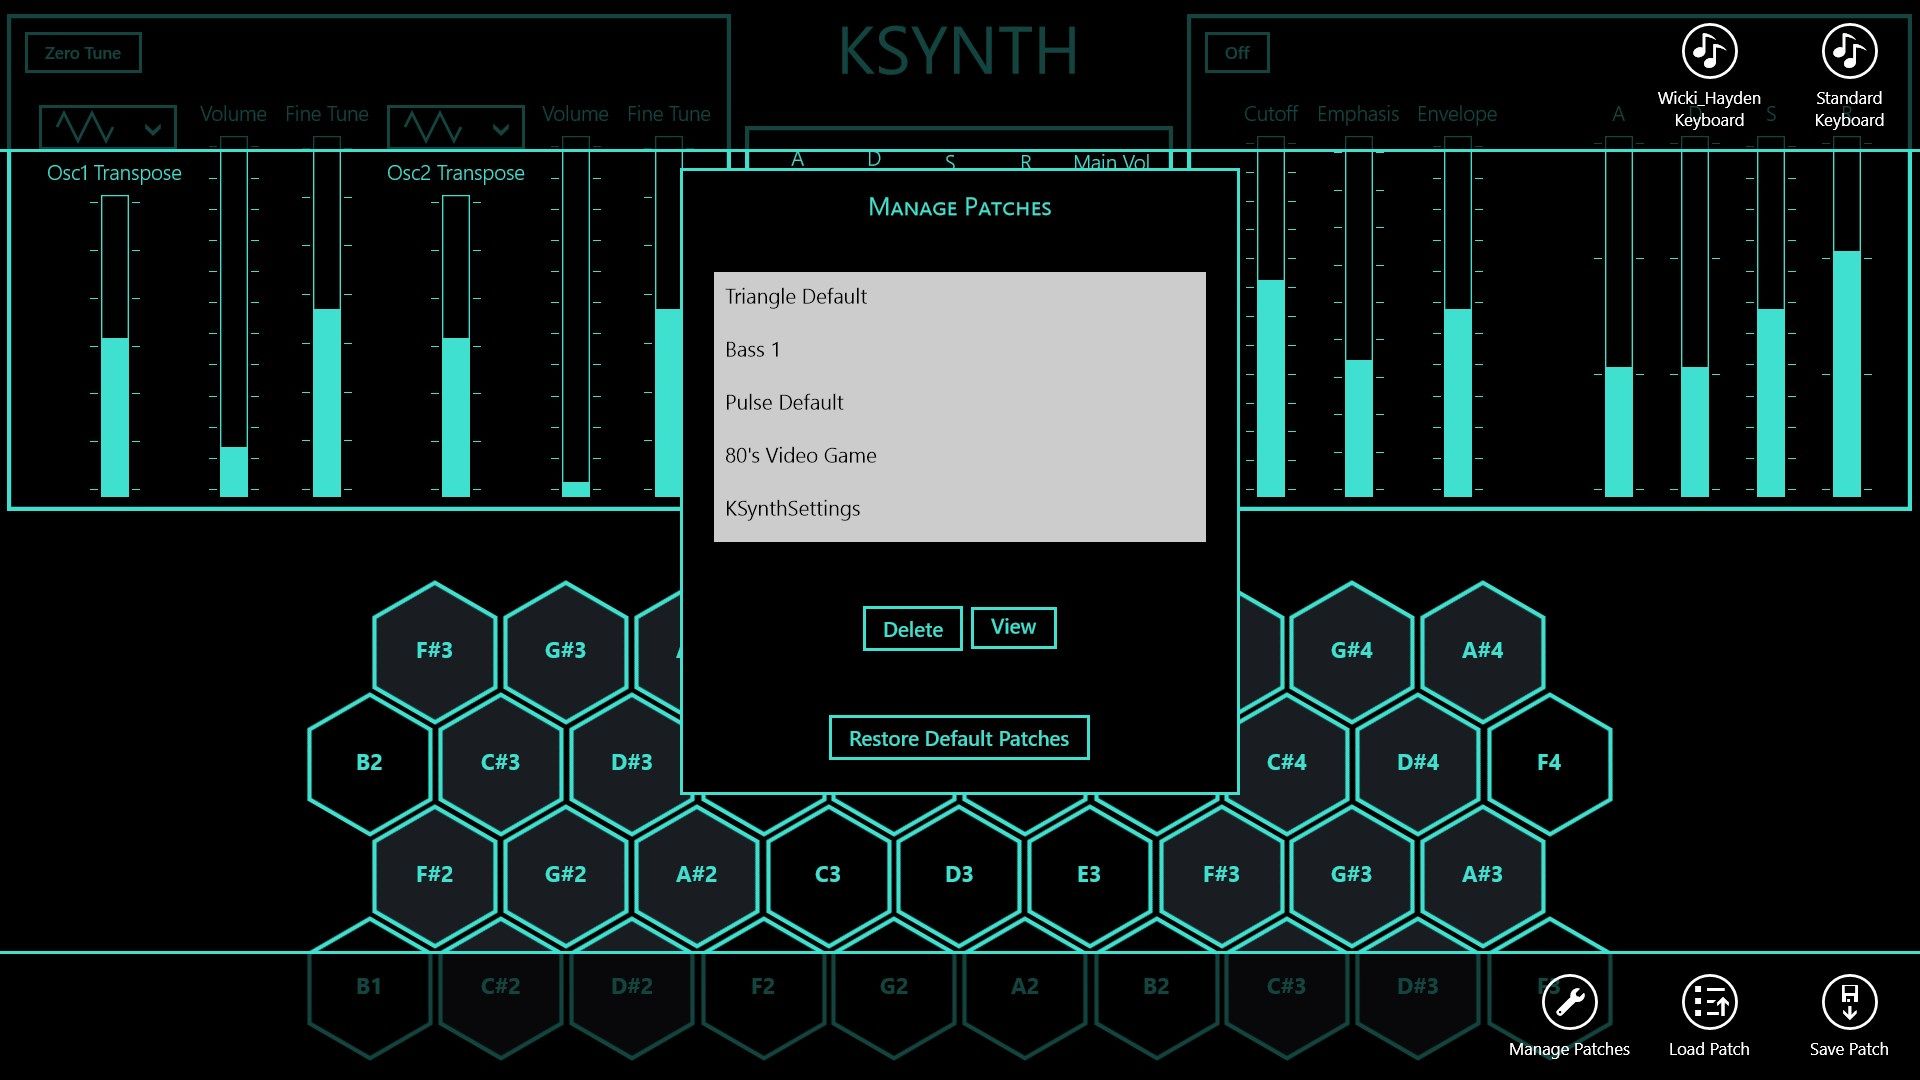 KSYNTH Patch Management